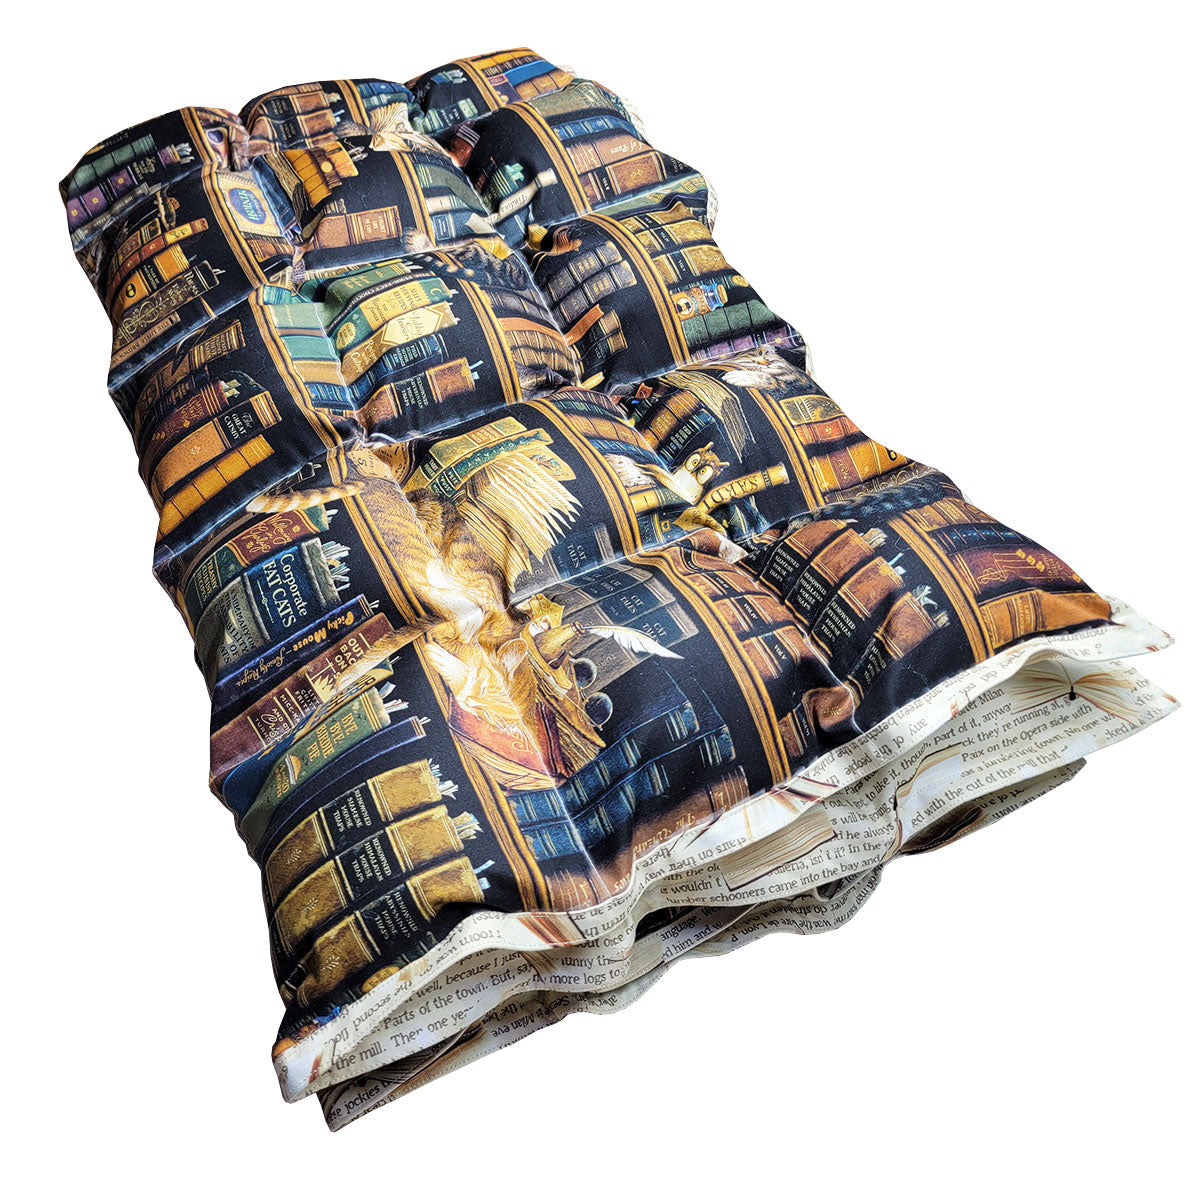 Clearance Weighted Blanket - Medium 12 lb Library Cats (for 100 lb user)